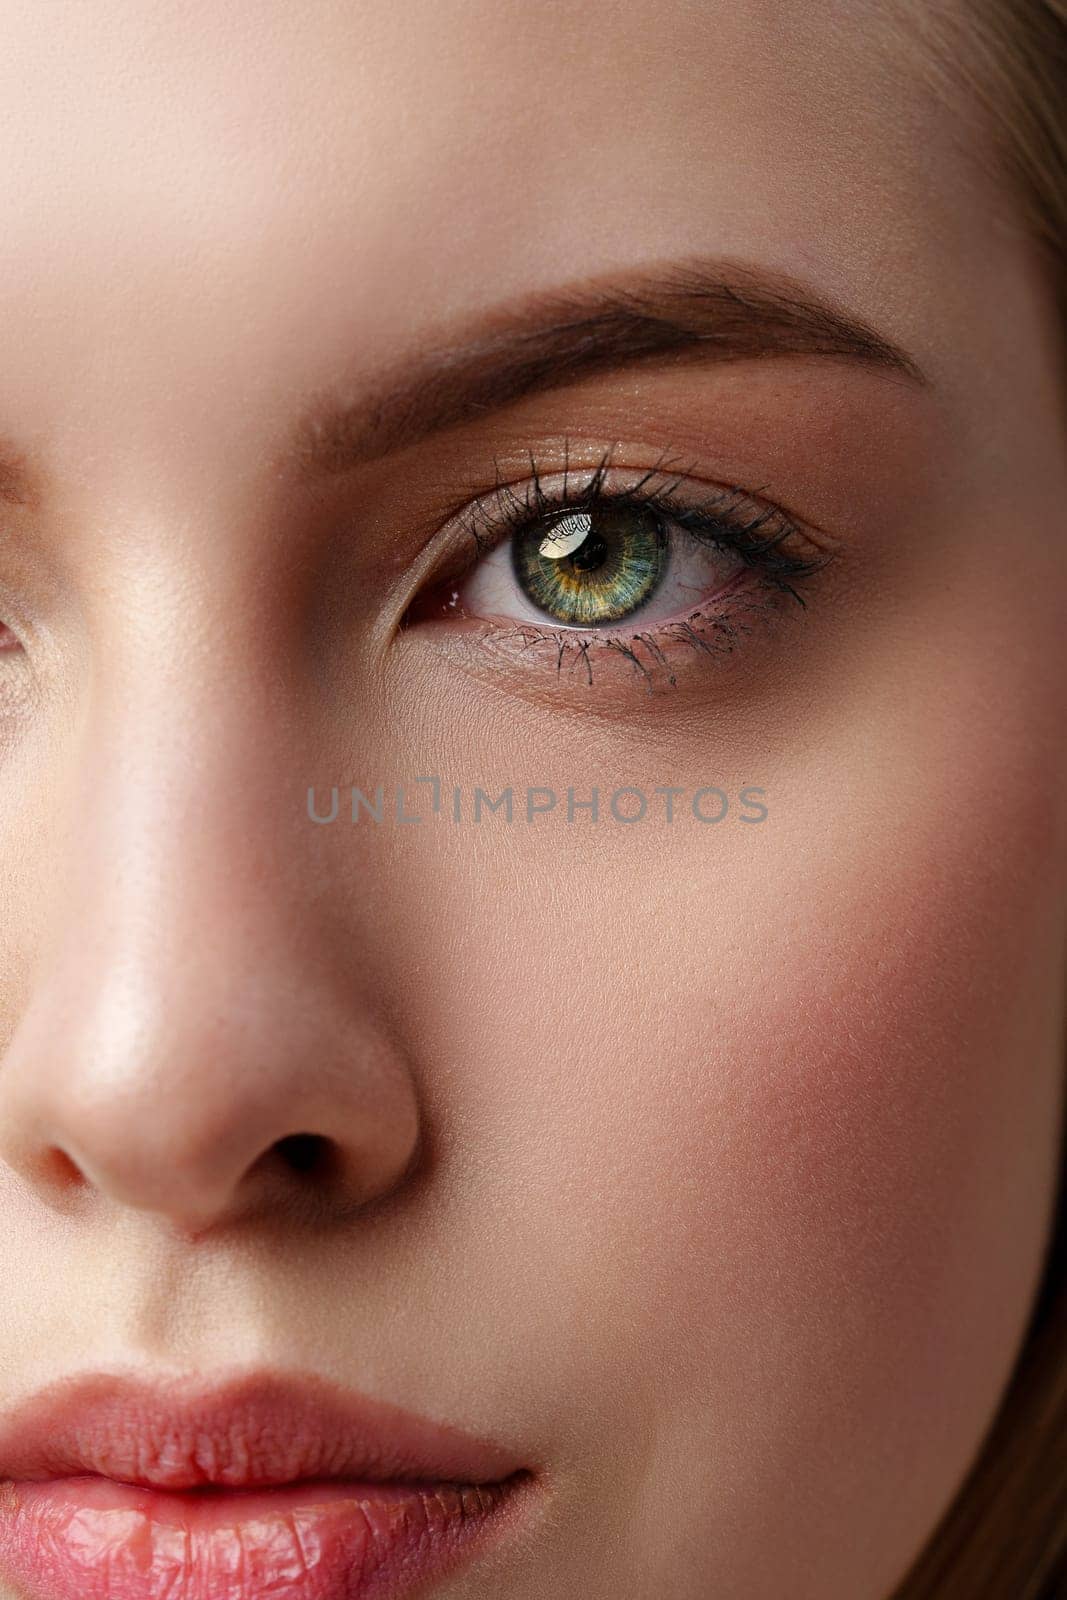 Close Up Portrait of Young Woman With Green Eyes